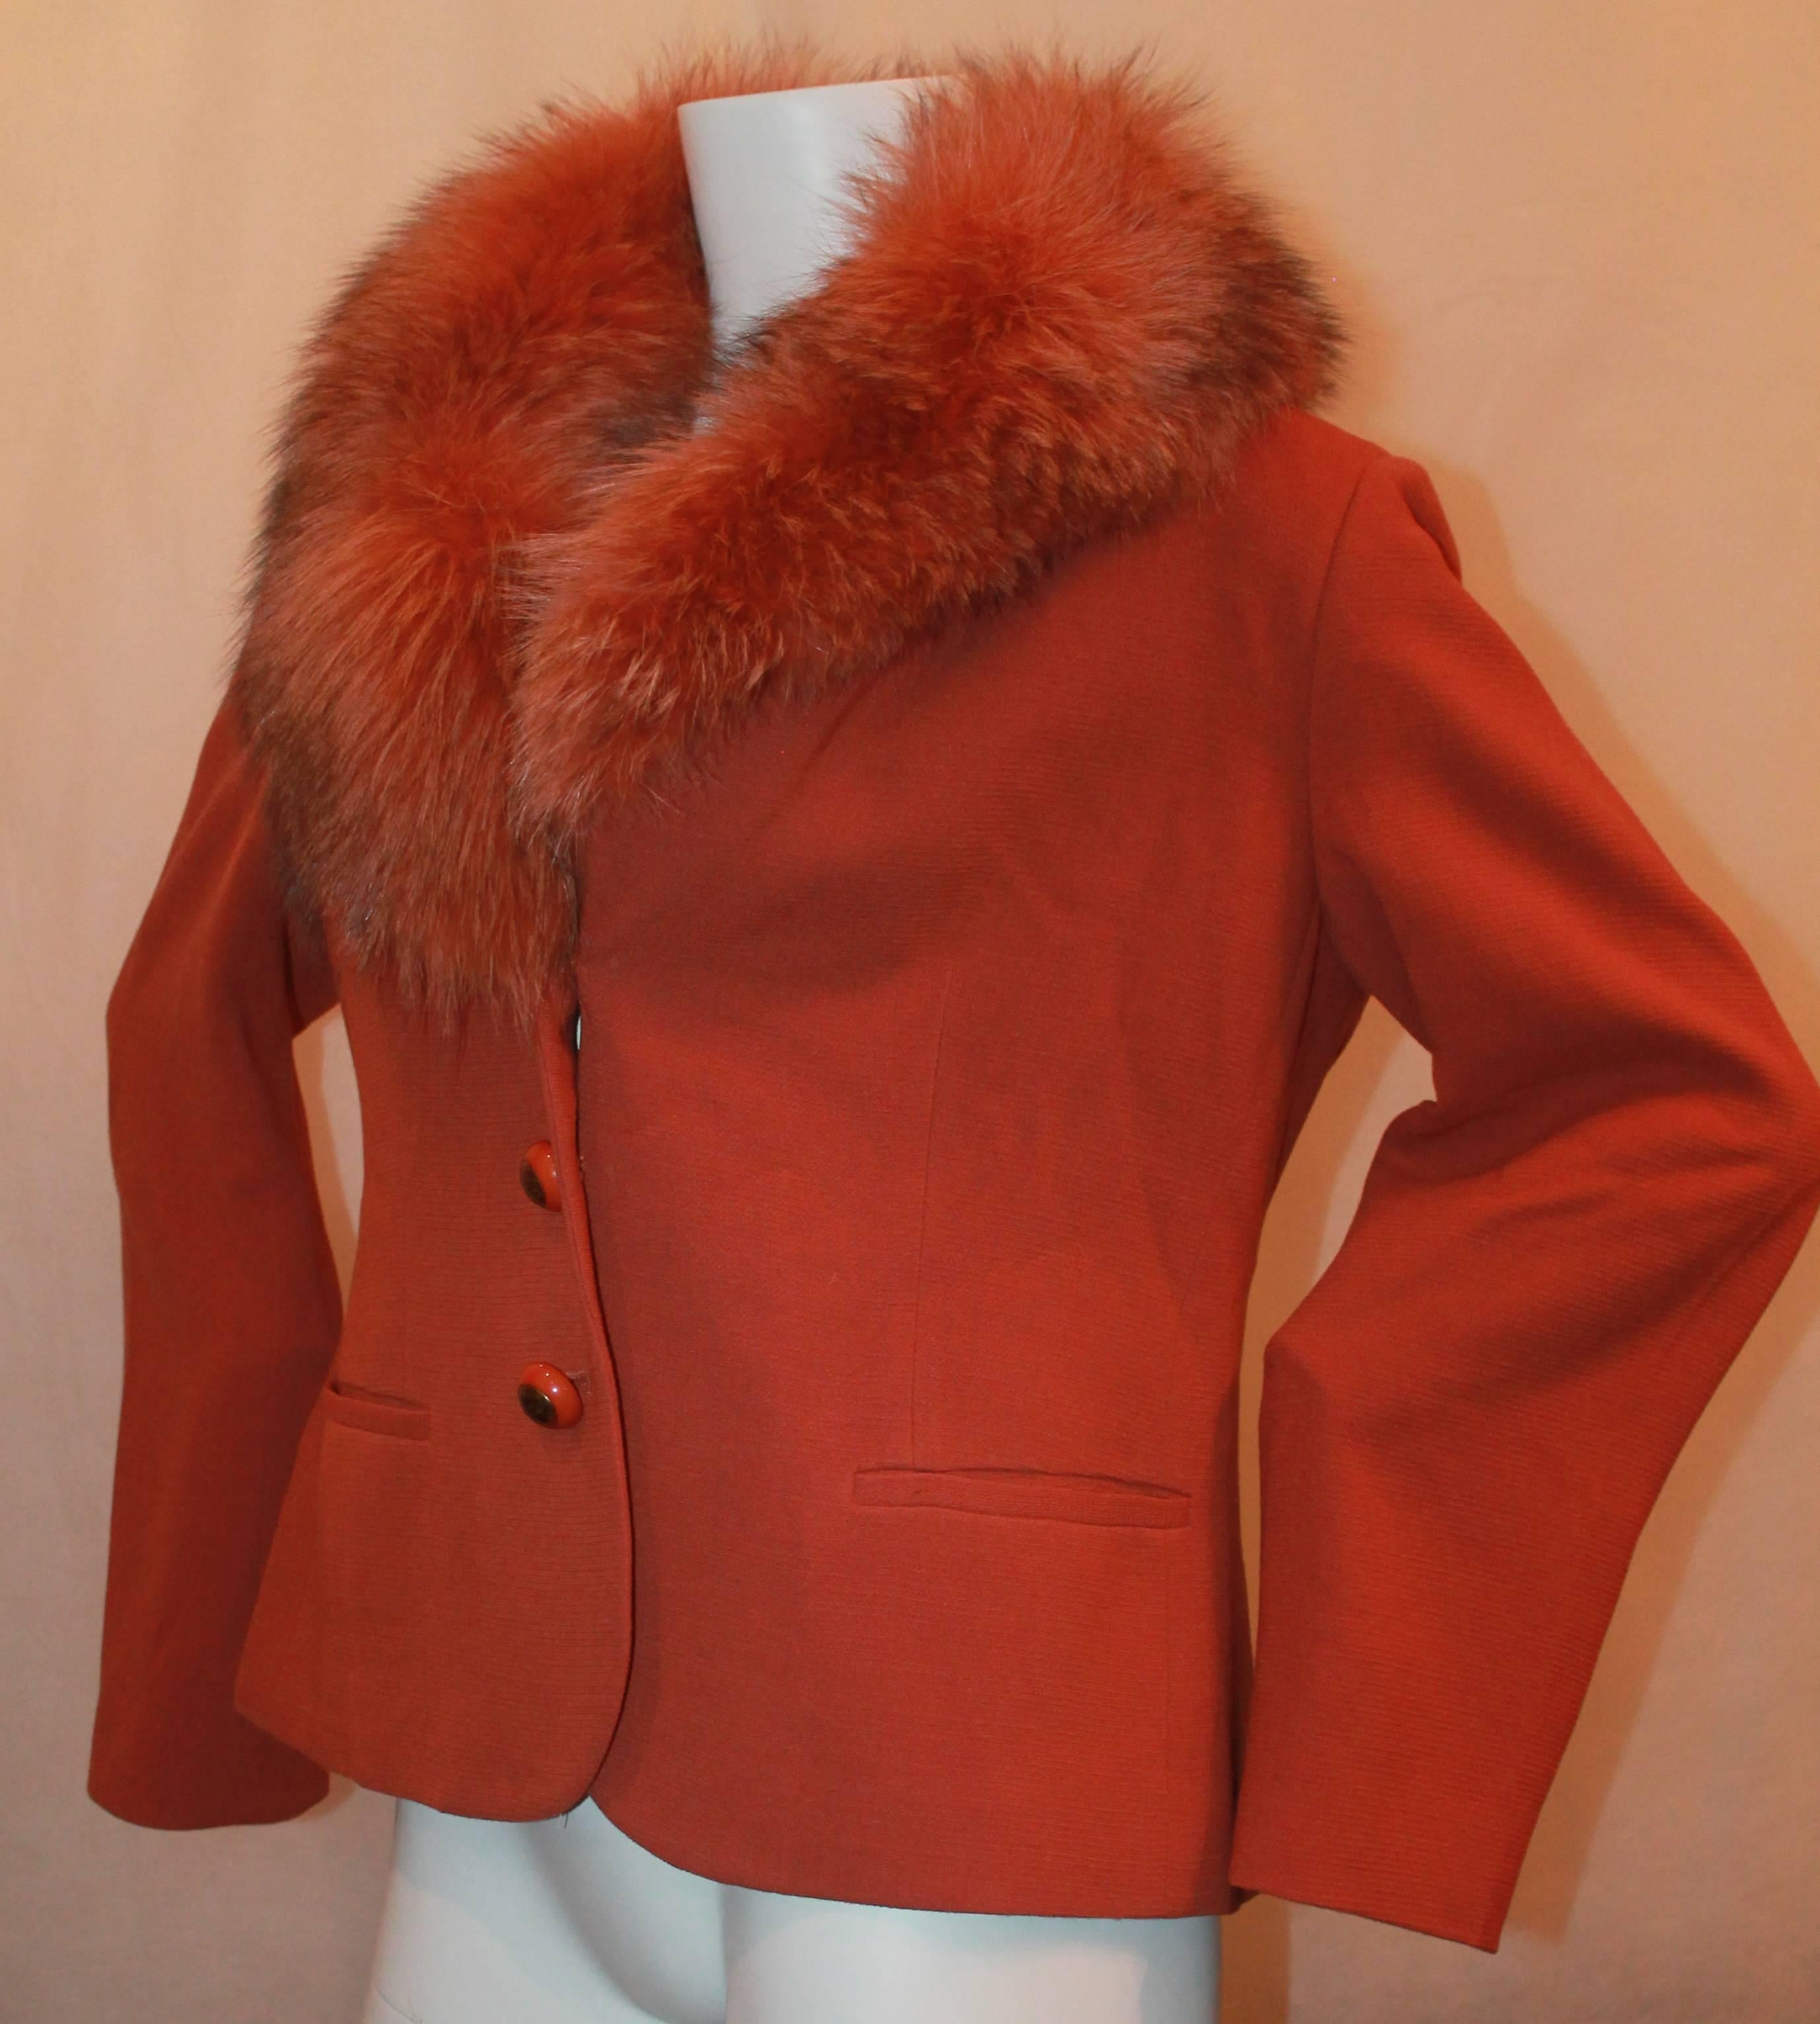 Agnona Burnt Orange Wool Jacket w/ Fox Collar - 30.  This jacket is in excellent condition.  It features a beautiful orange fox fur collar, three orange and gold buttons, and two shallow pockets.  The collar is not